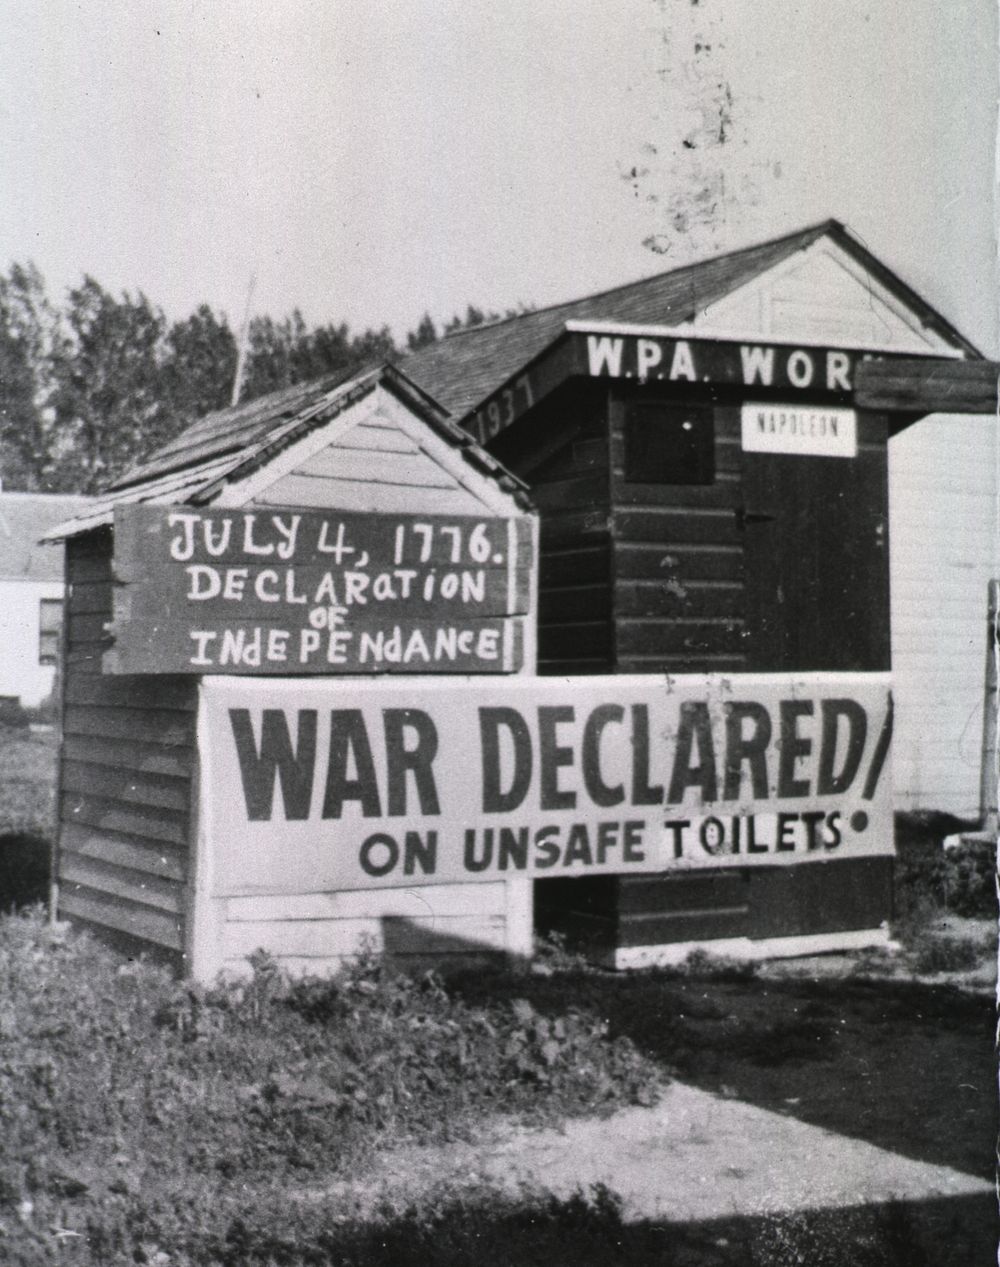 War Declared on Unsafe Toilets!, archive photo.